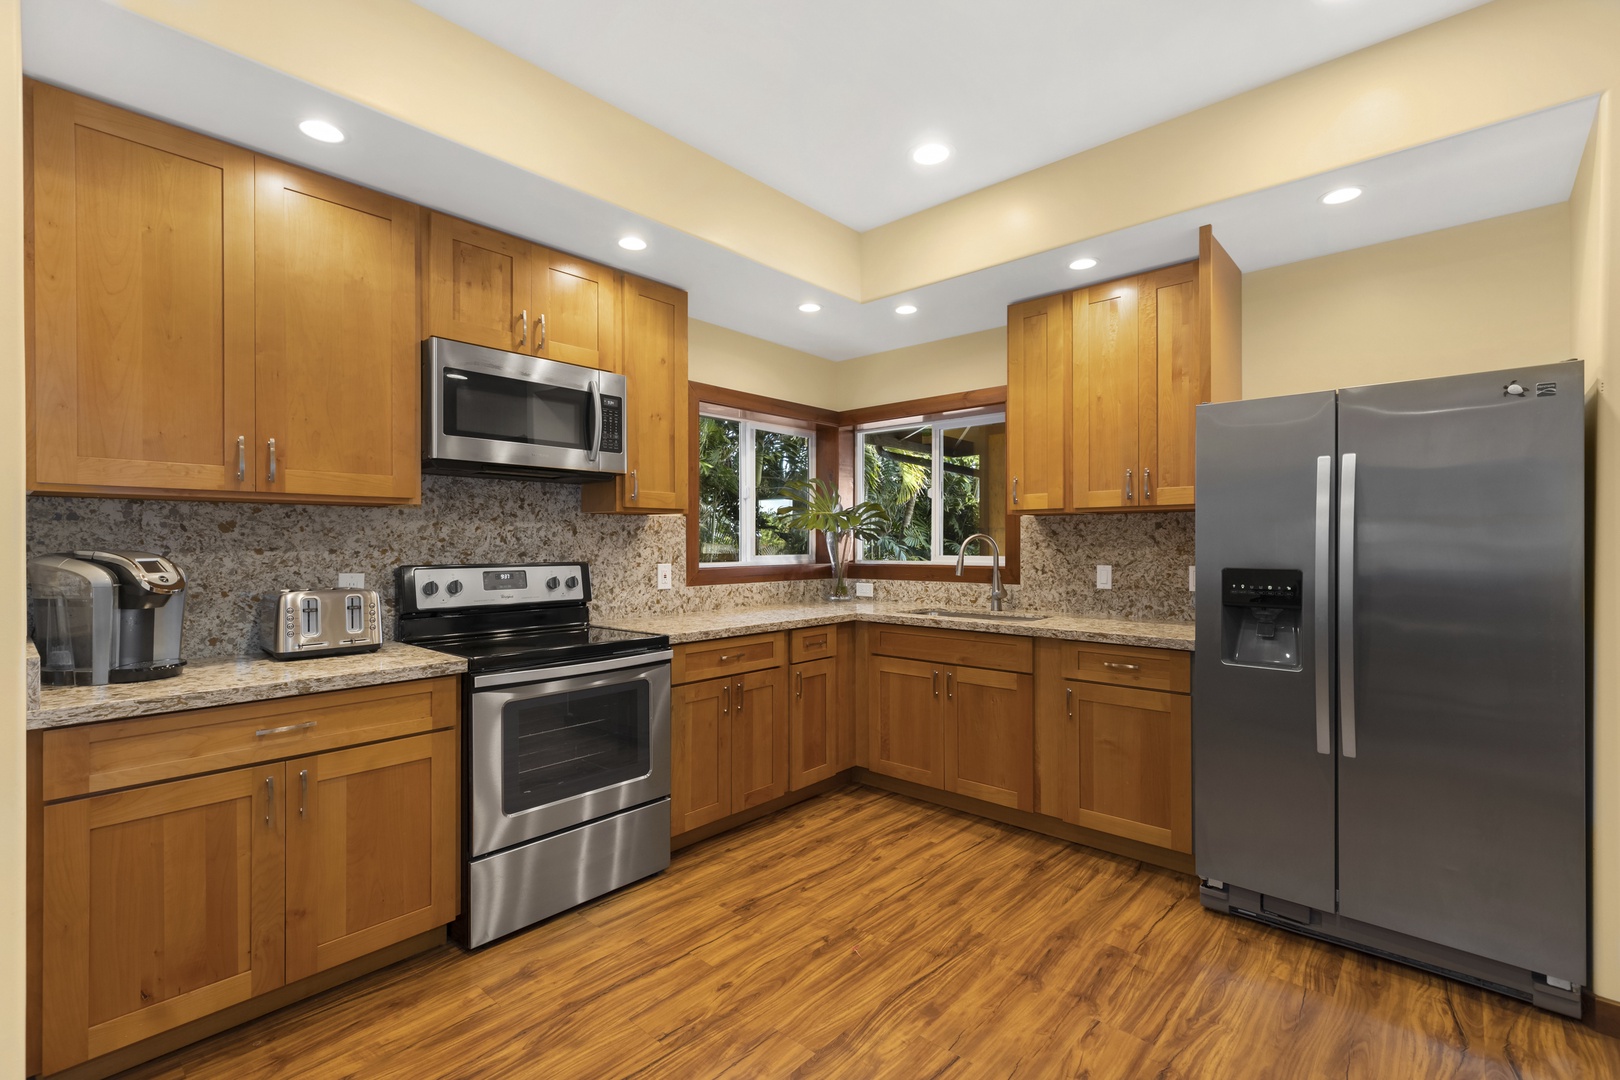 Haleiwa Vacation Rentals, Waimea Dream - The downstairs full kitchen comes equipped with stainless appliances, a coffee maker, and a toaster.